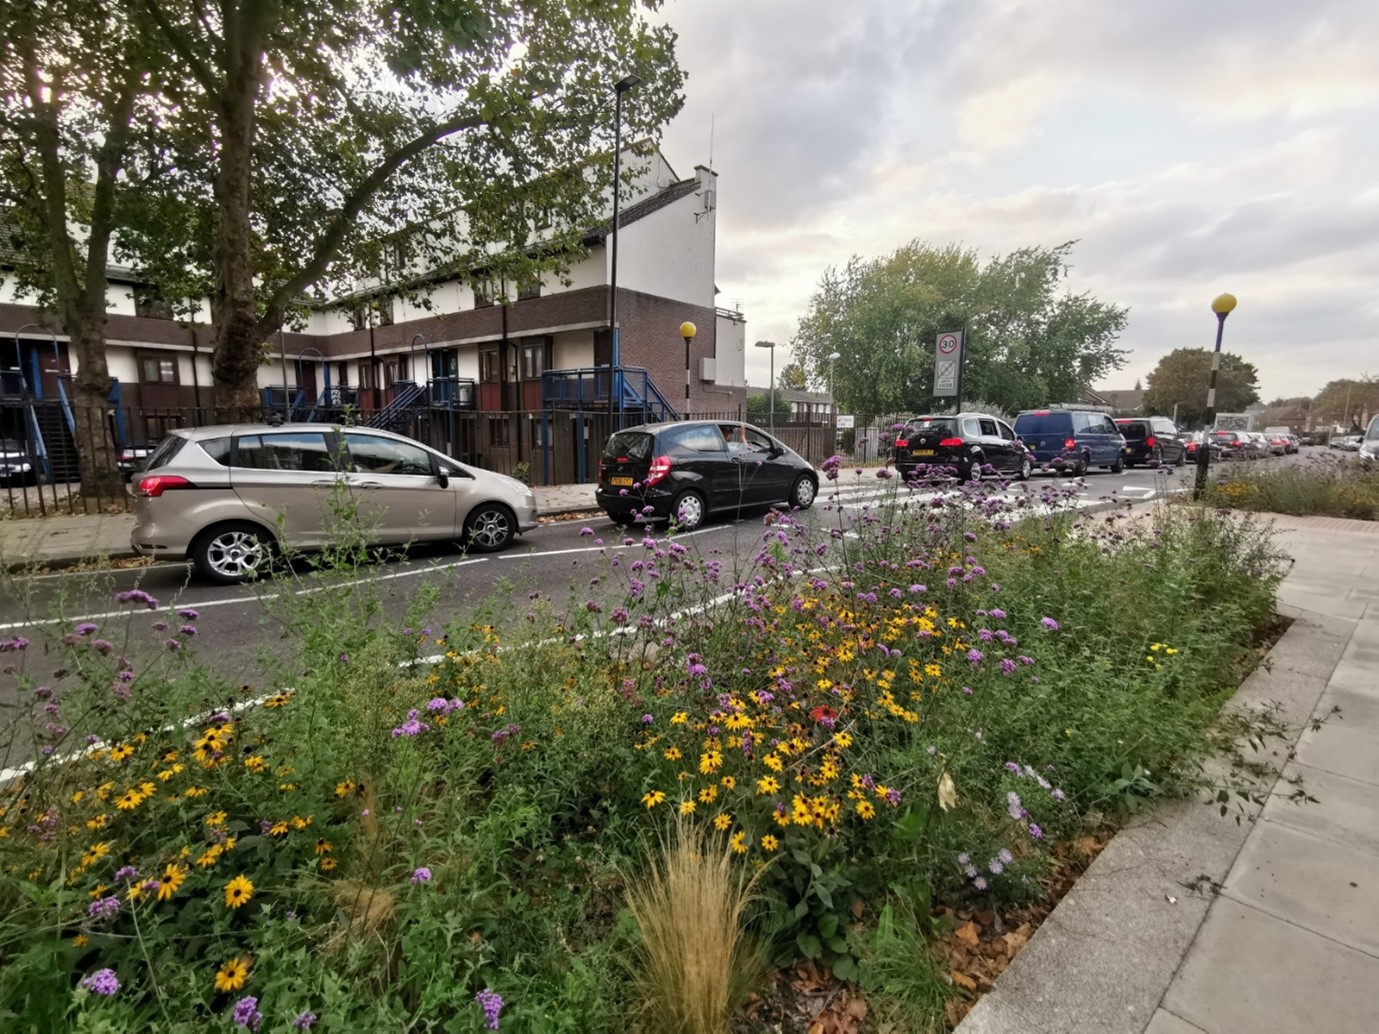 Planting in the pavement with a variety of plants and flowers